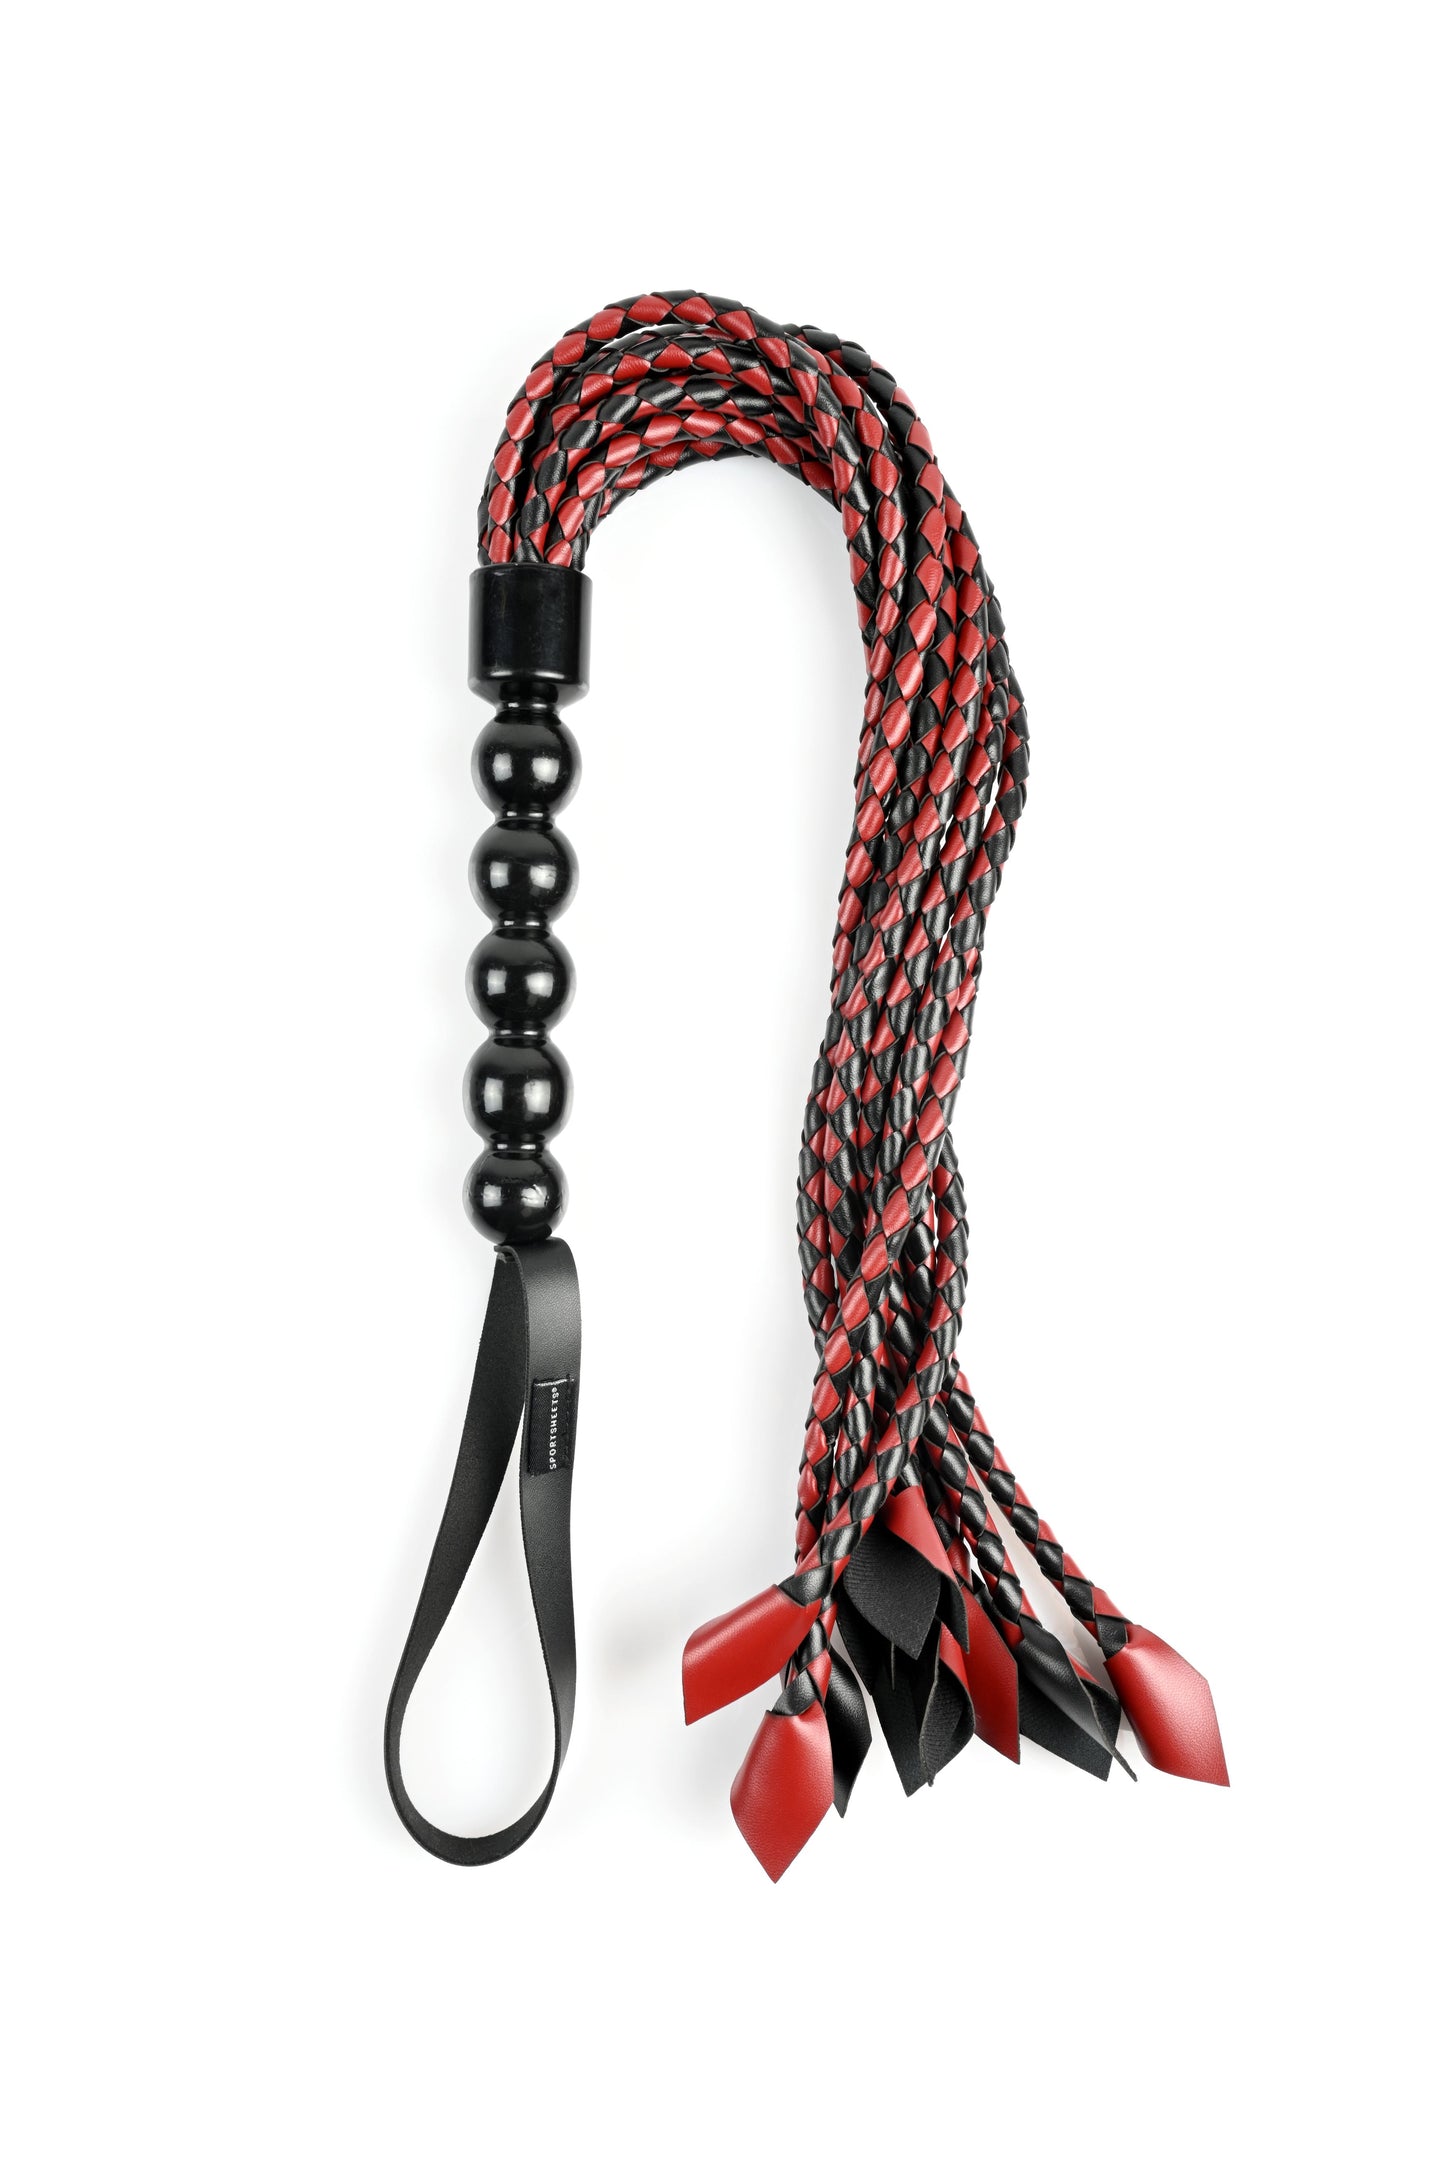 Front view of the curved Sportsheets Saffron Braided Flogger shows the braided detail, beaded handle, and wrist loop.